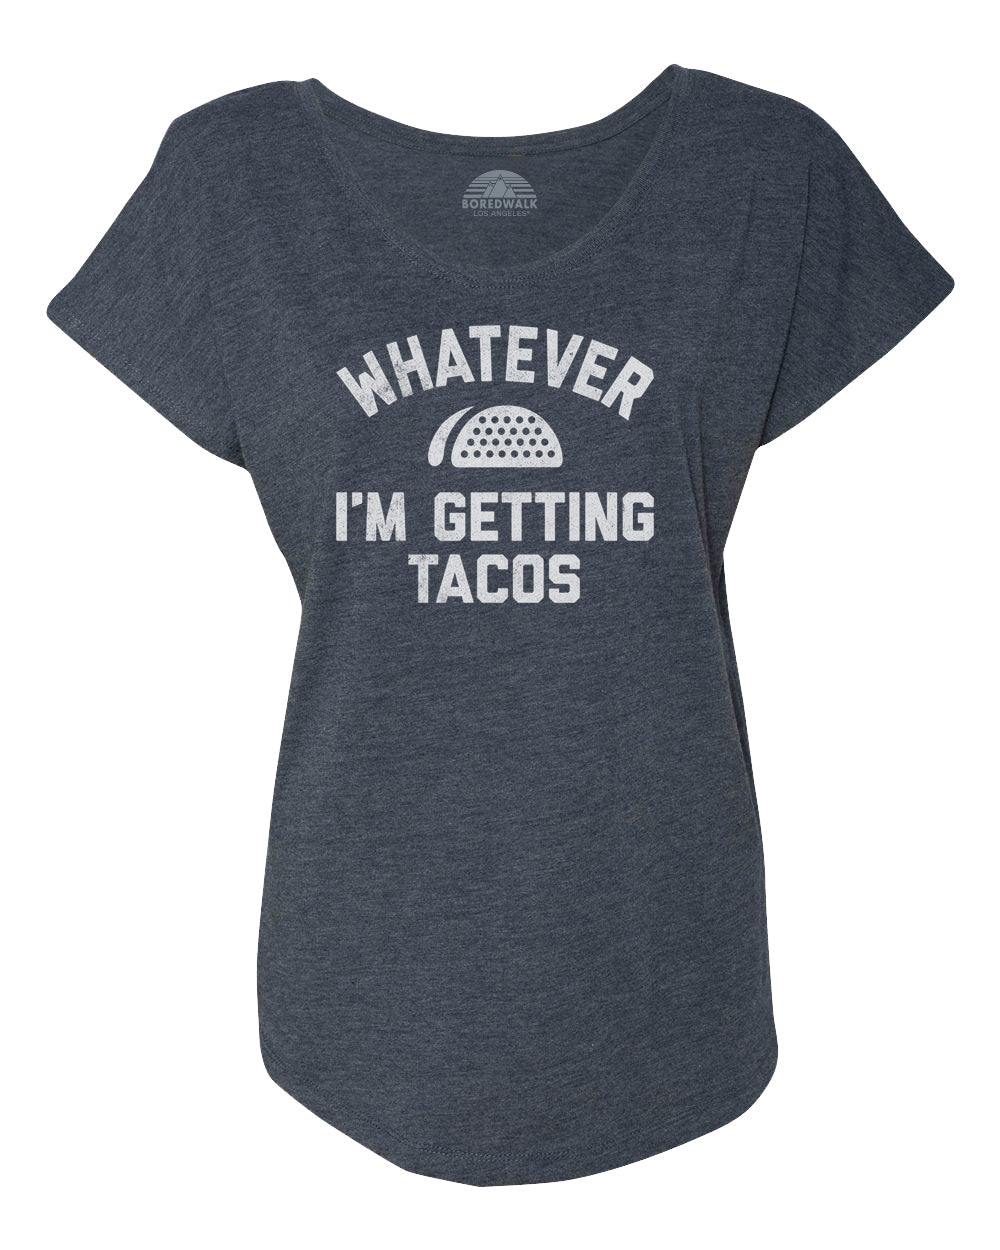 Women's Whatever I'm Getting Tacos Scoop Neck T-Shirt